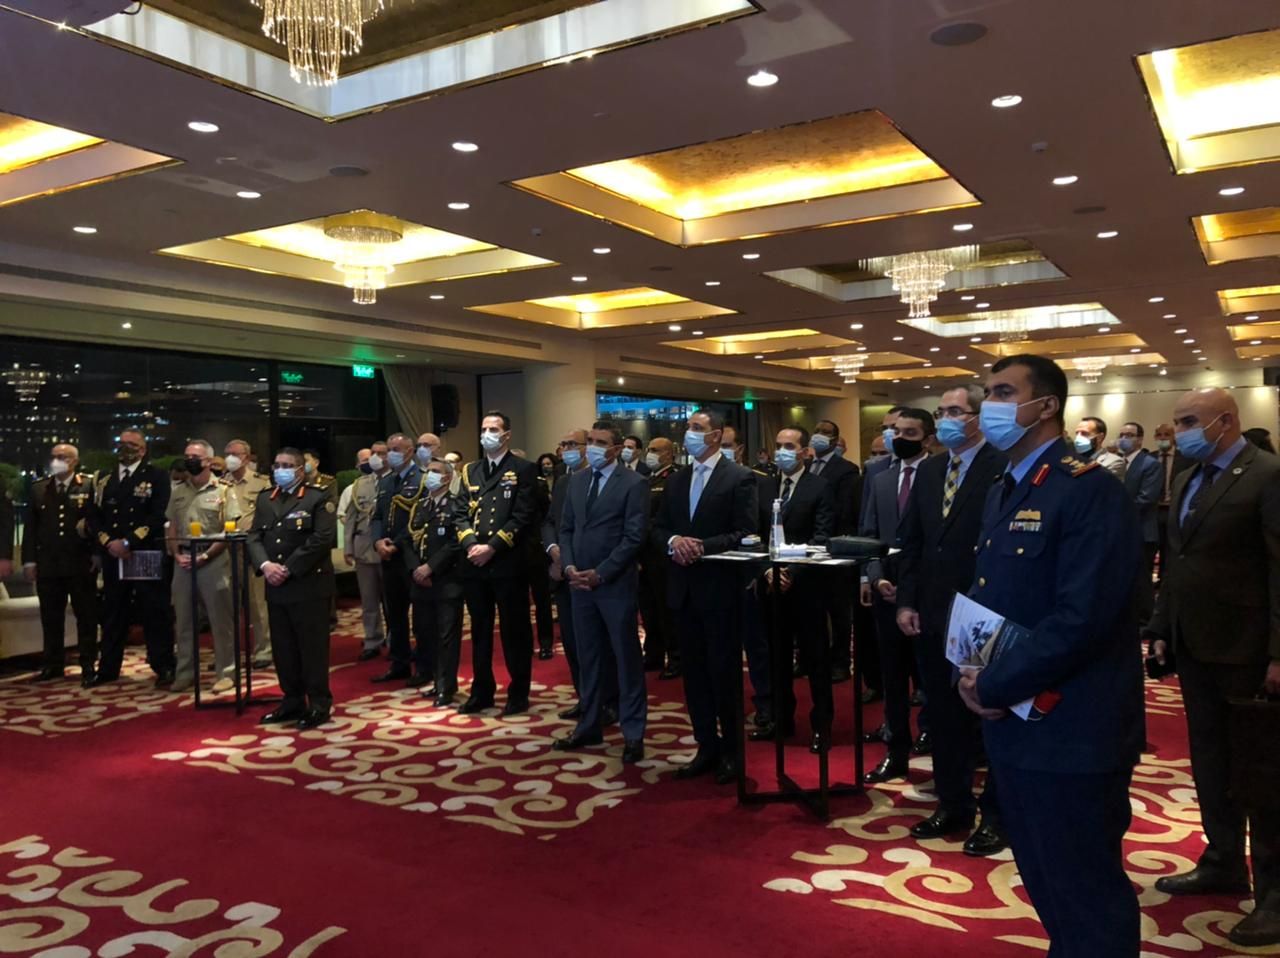 Over 100 military and government attendees join briefing for EDEX 2021 in Cairo